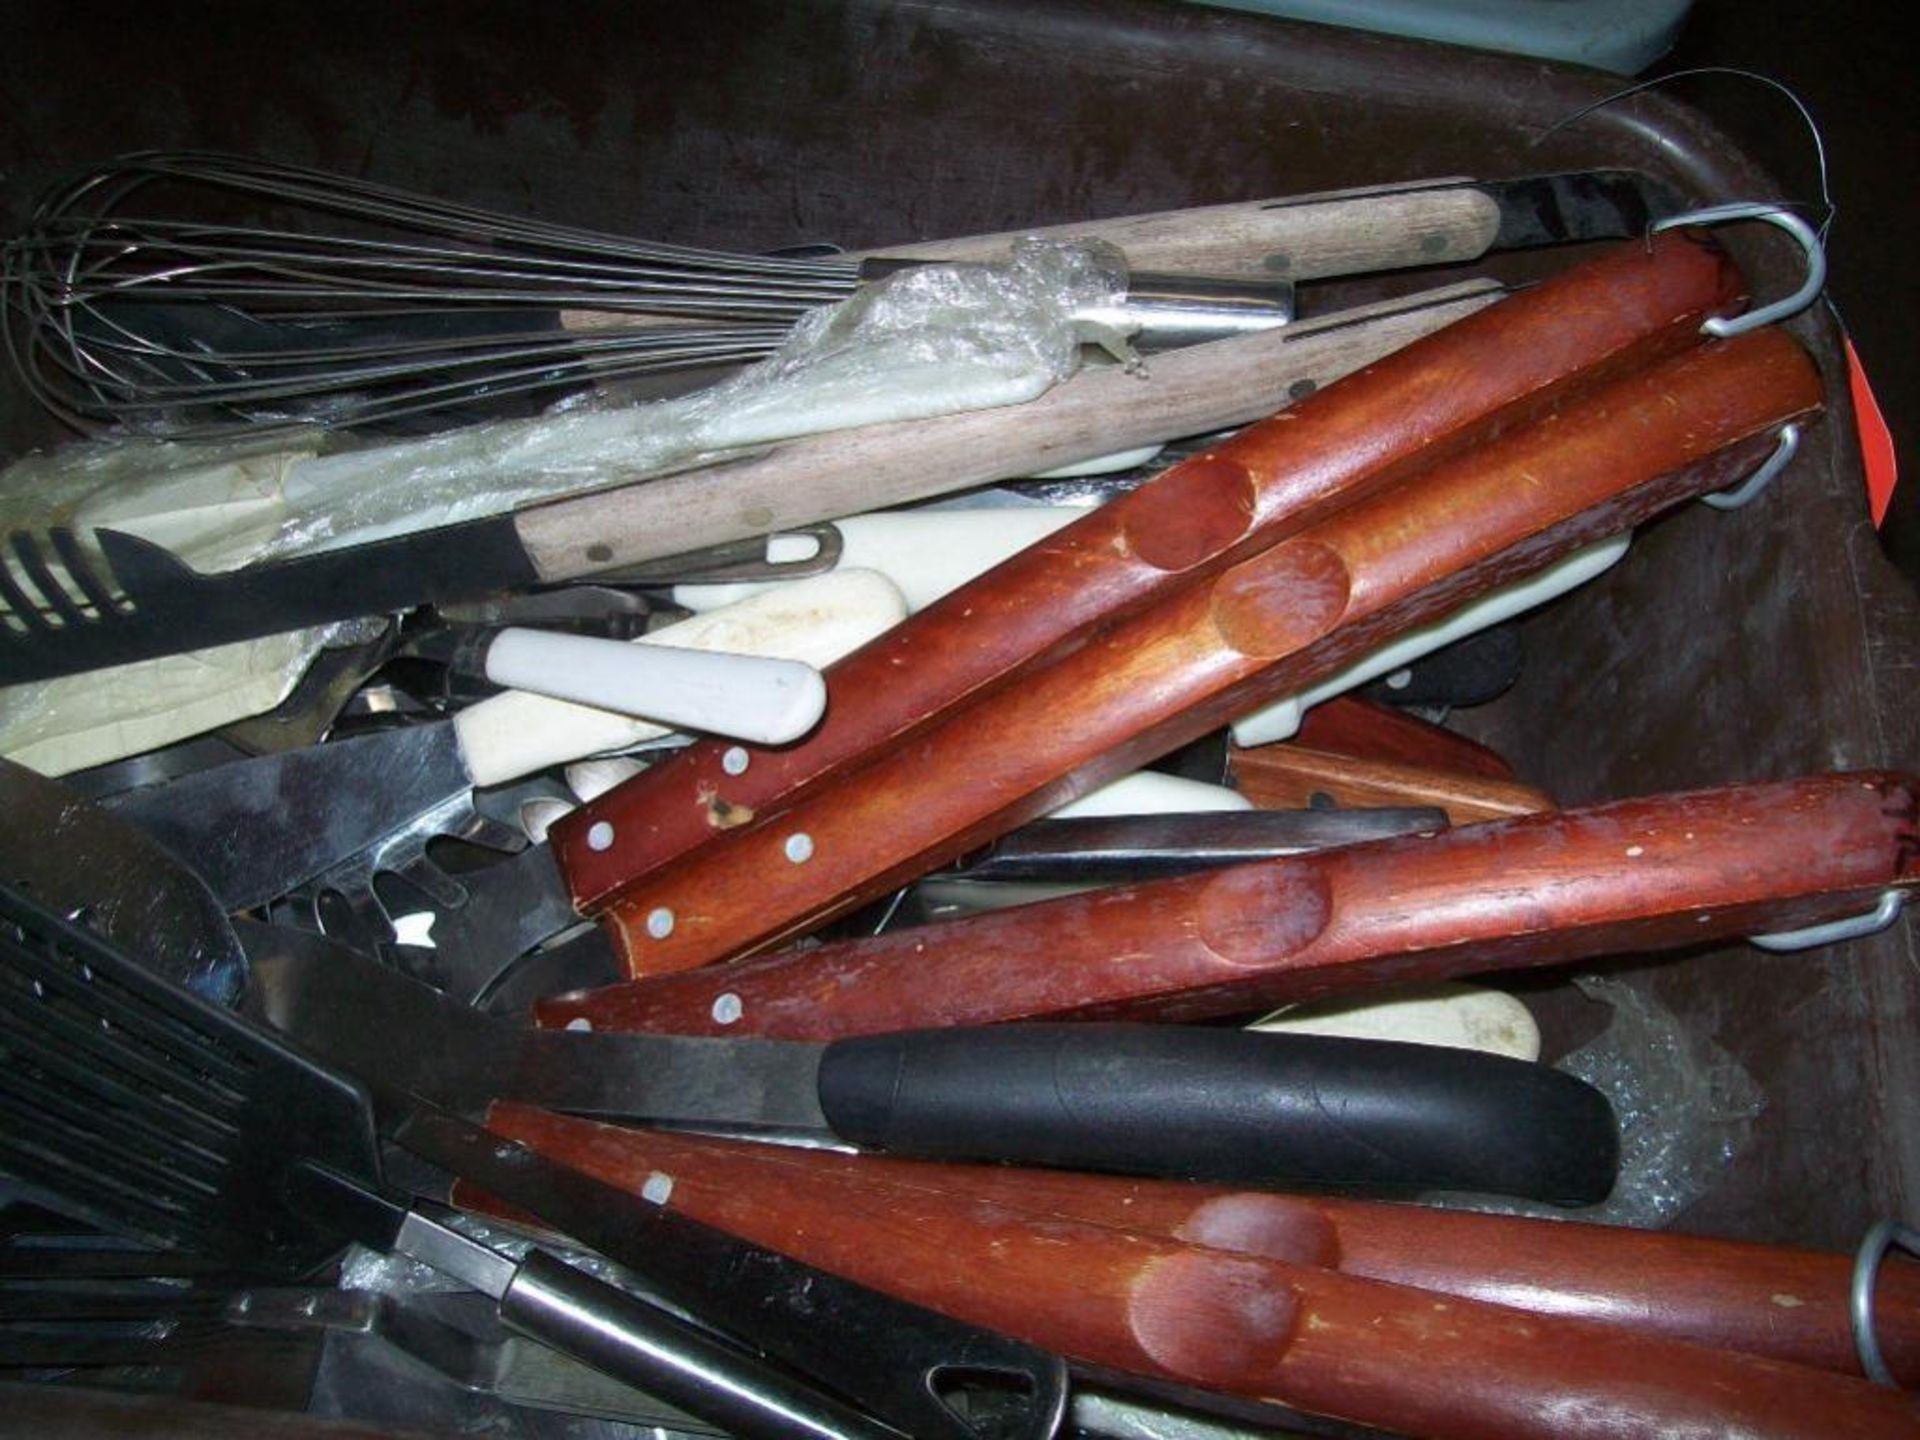 Lot of 300+/- assorted utensils including serving forks/spoons, spatulas, ice scoops, knives, bottle - Image 2 of 4